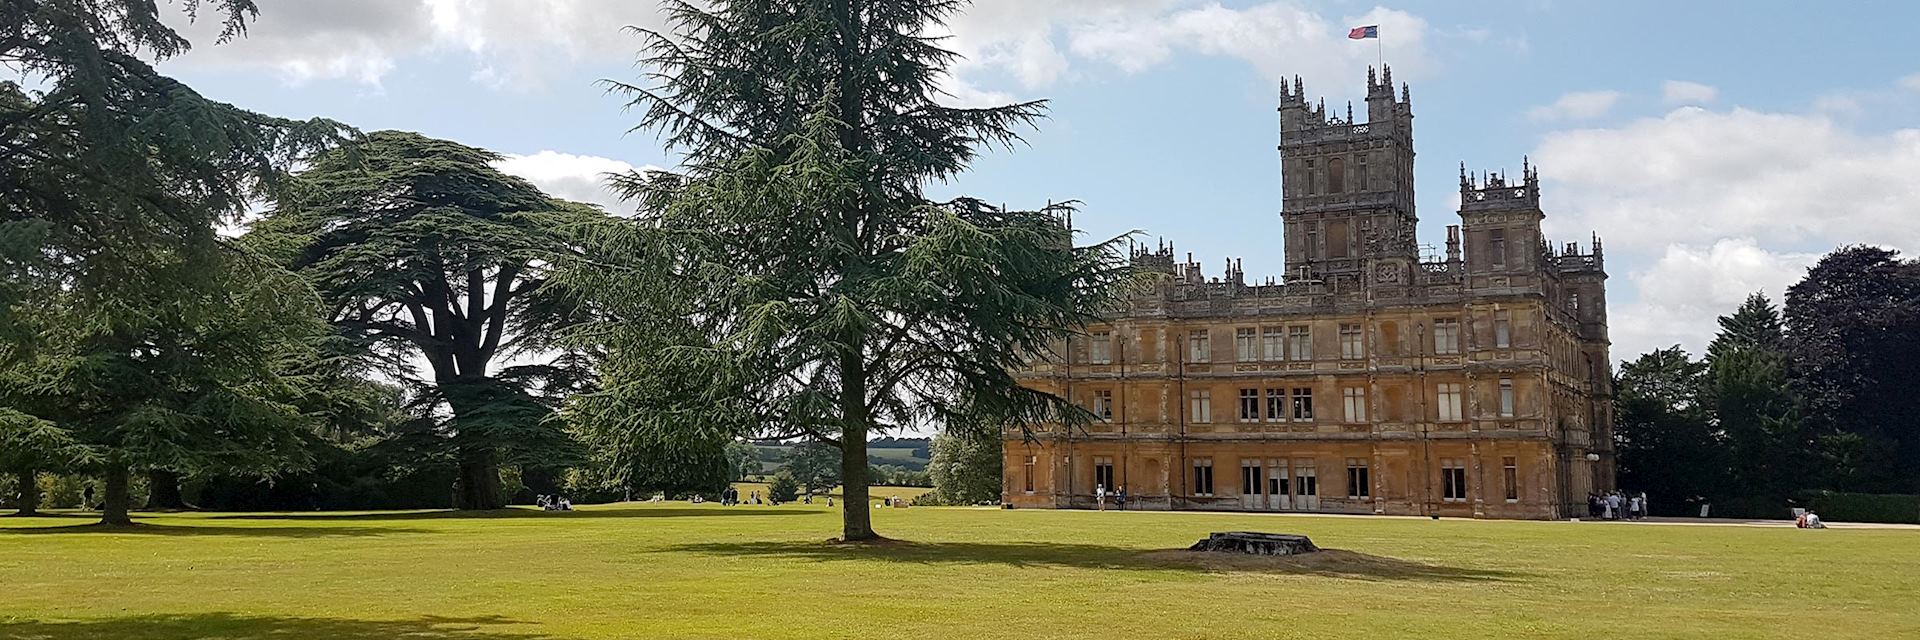 Highclere Castle and grounds